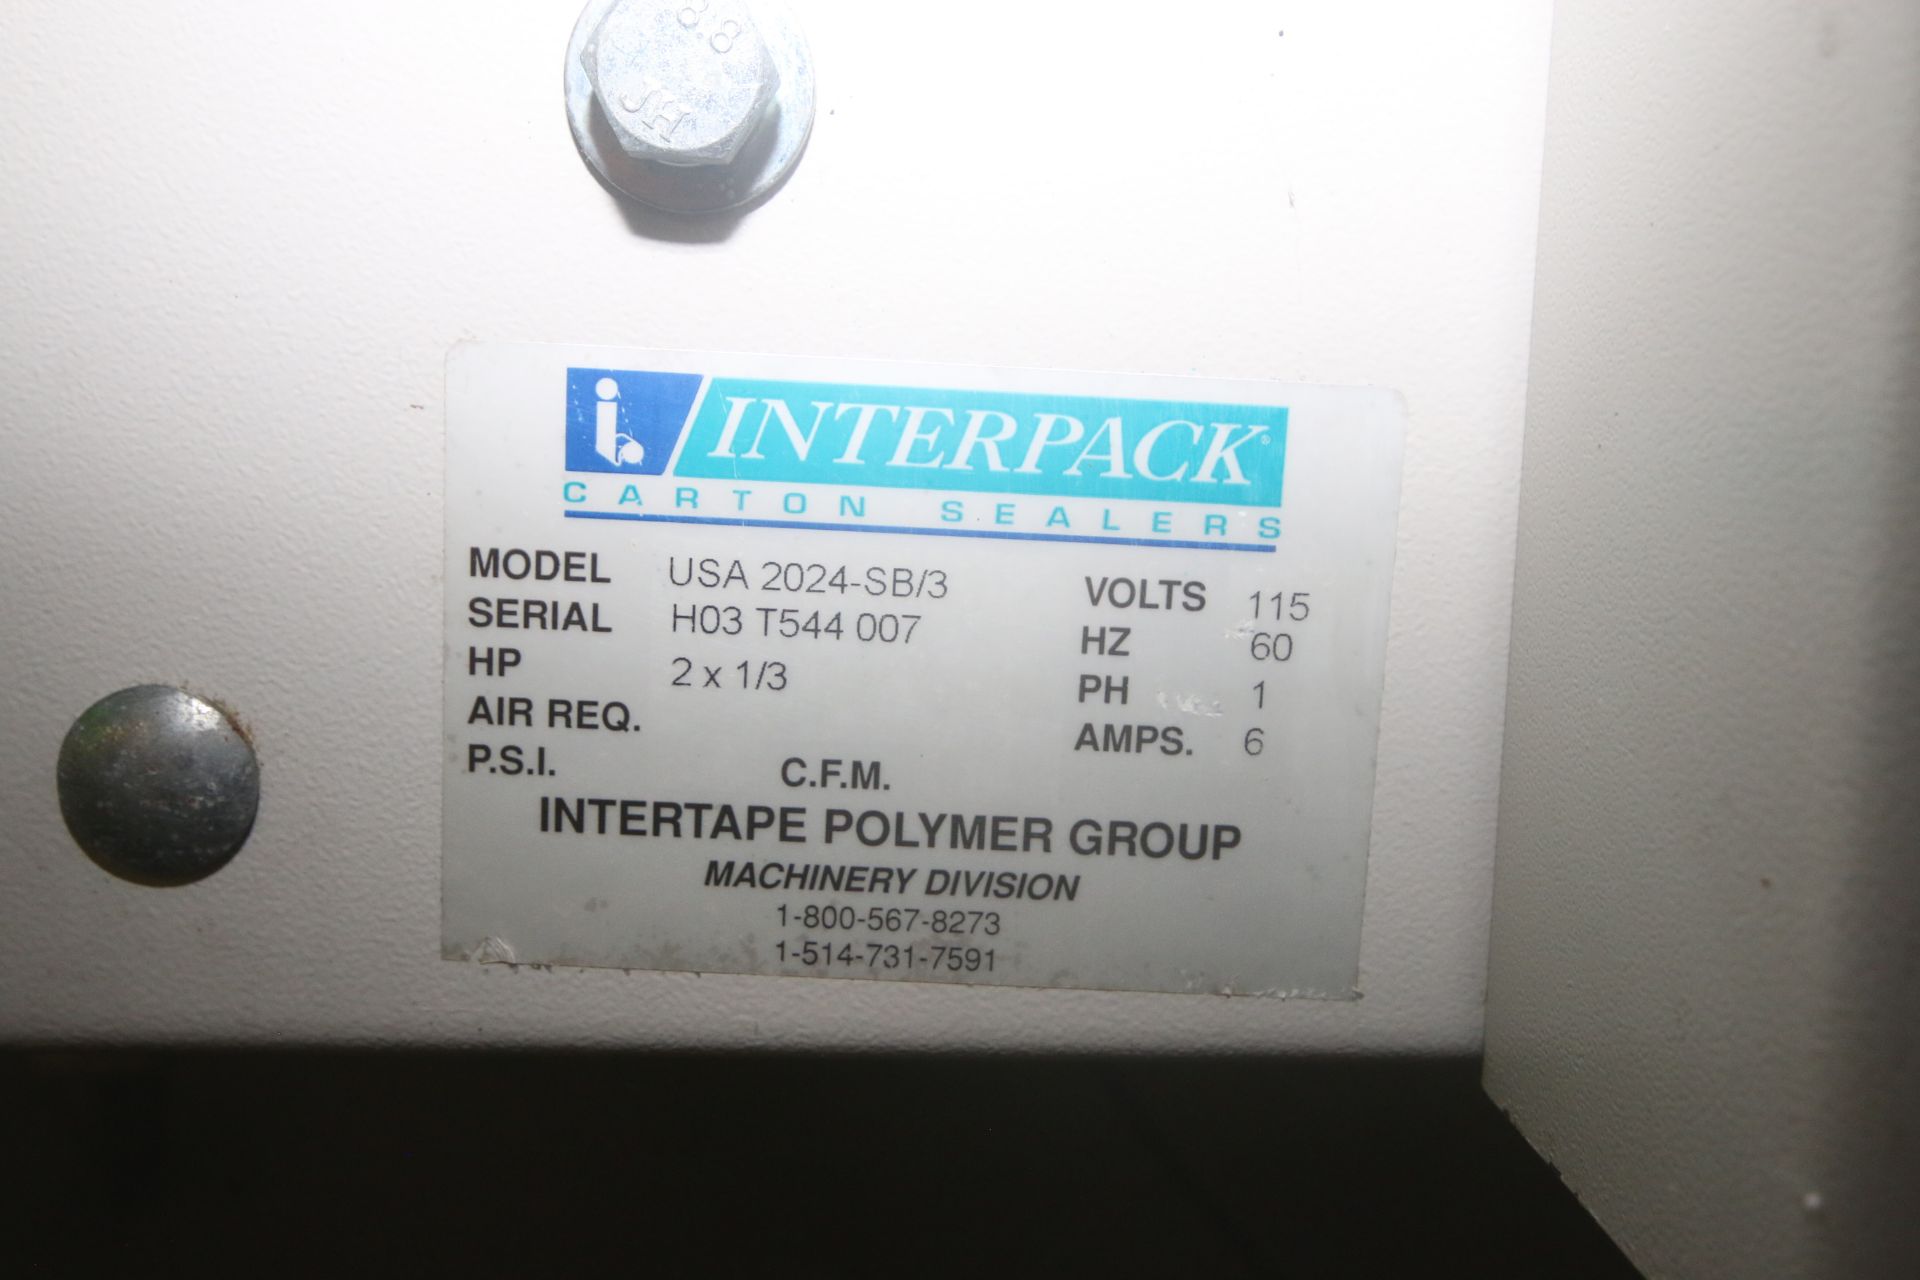 InterPack Top & Bottom Case Sealer, M/N USA 2024-SB/3, S/N H03 T544 007, 115 Volts, 1 Phase, with - Image 5 of 5